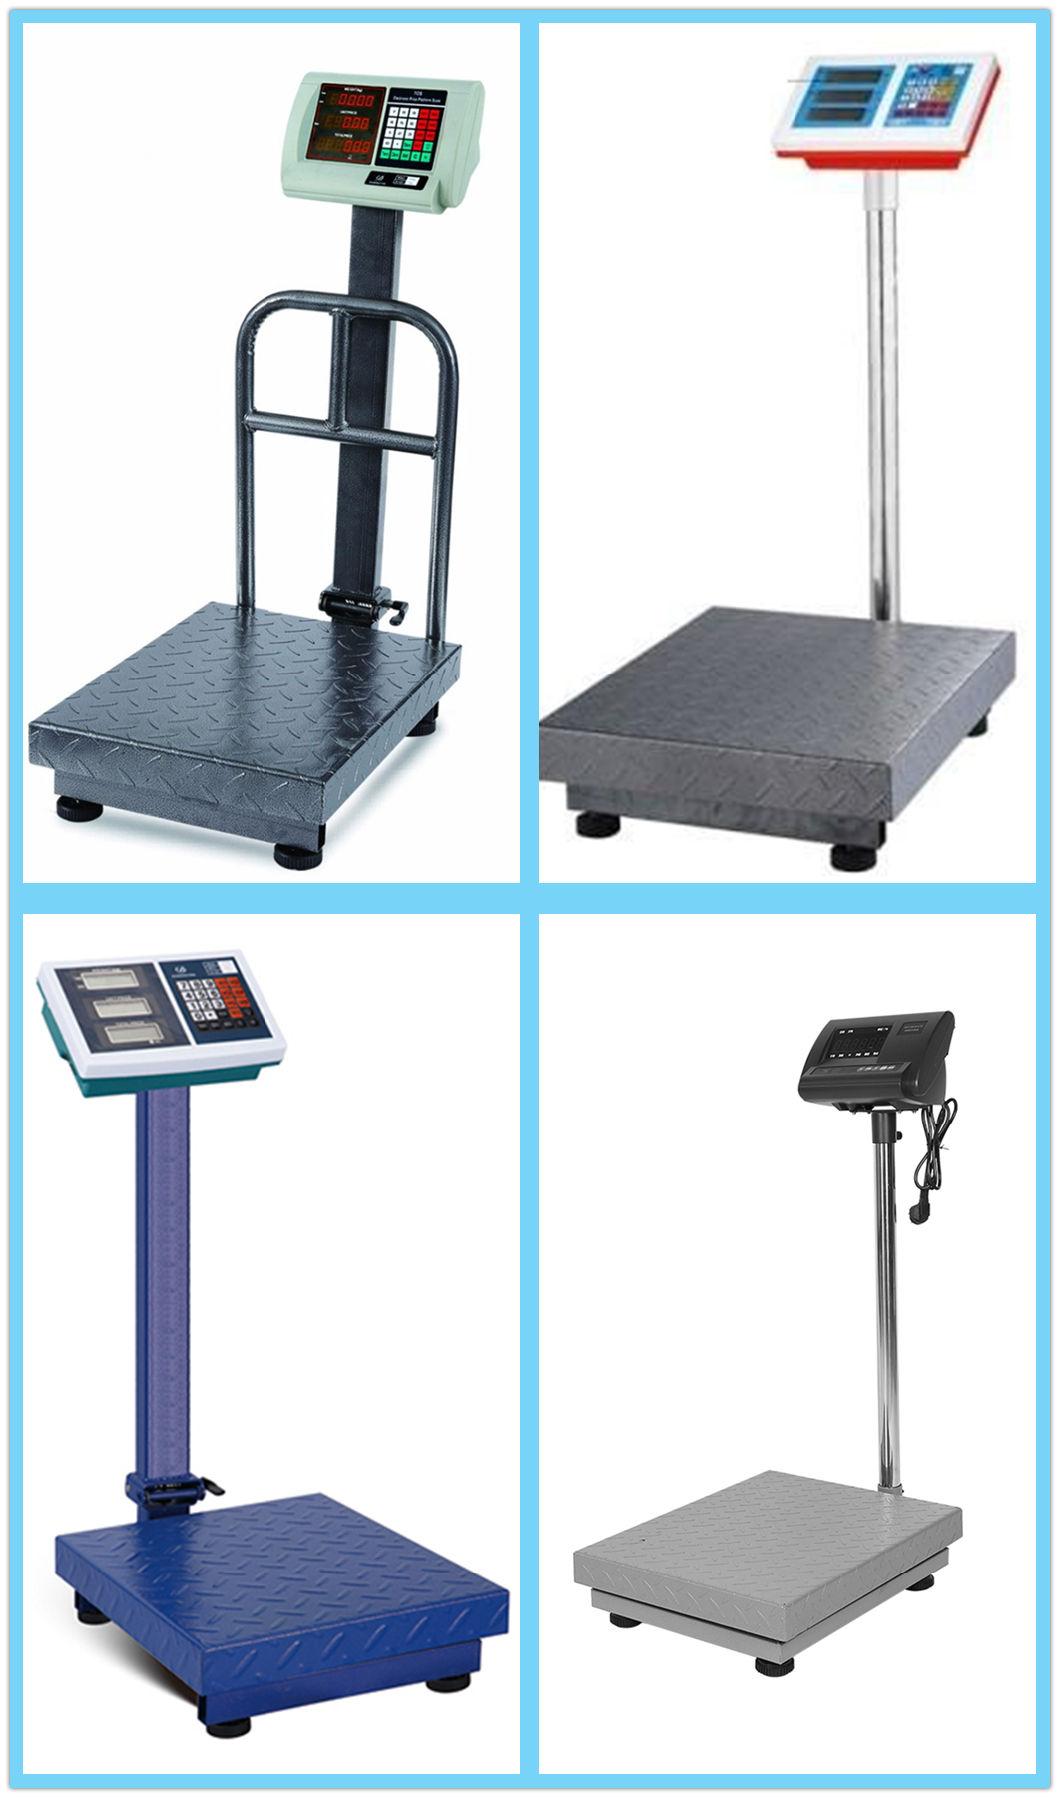 Calibration of Tcs Electronic 100kg Platform Weighing Scales 30*40 LED Display